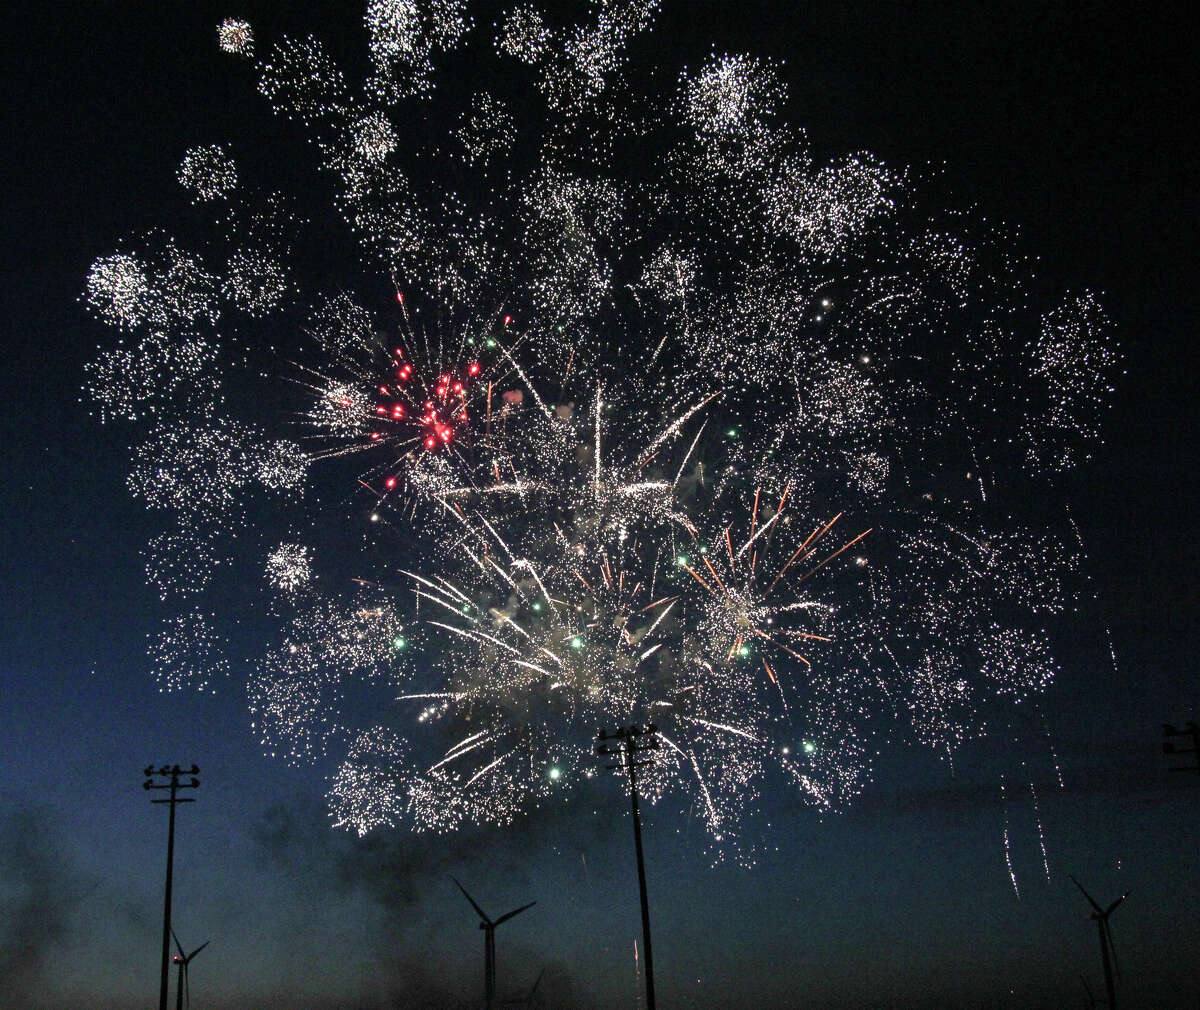 Laker High School celebrated the class of 2020 on Friday evening with a special ceremony, parades through Elkton, Pigeon and Bay Port, and fireworks at the football stadium.